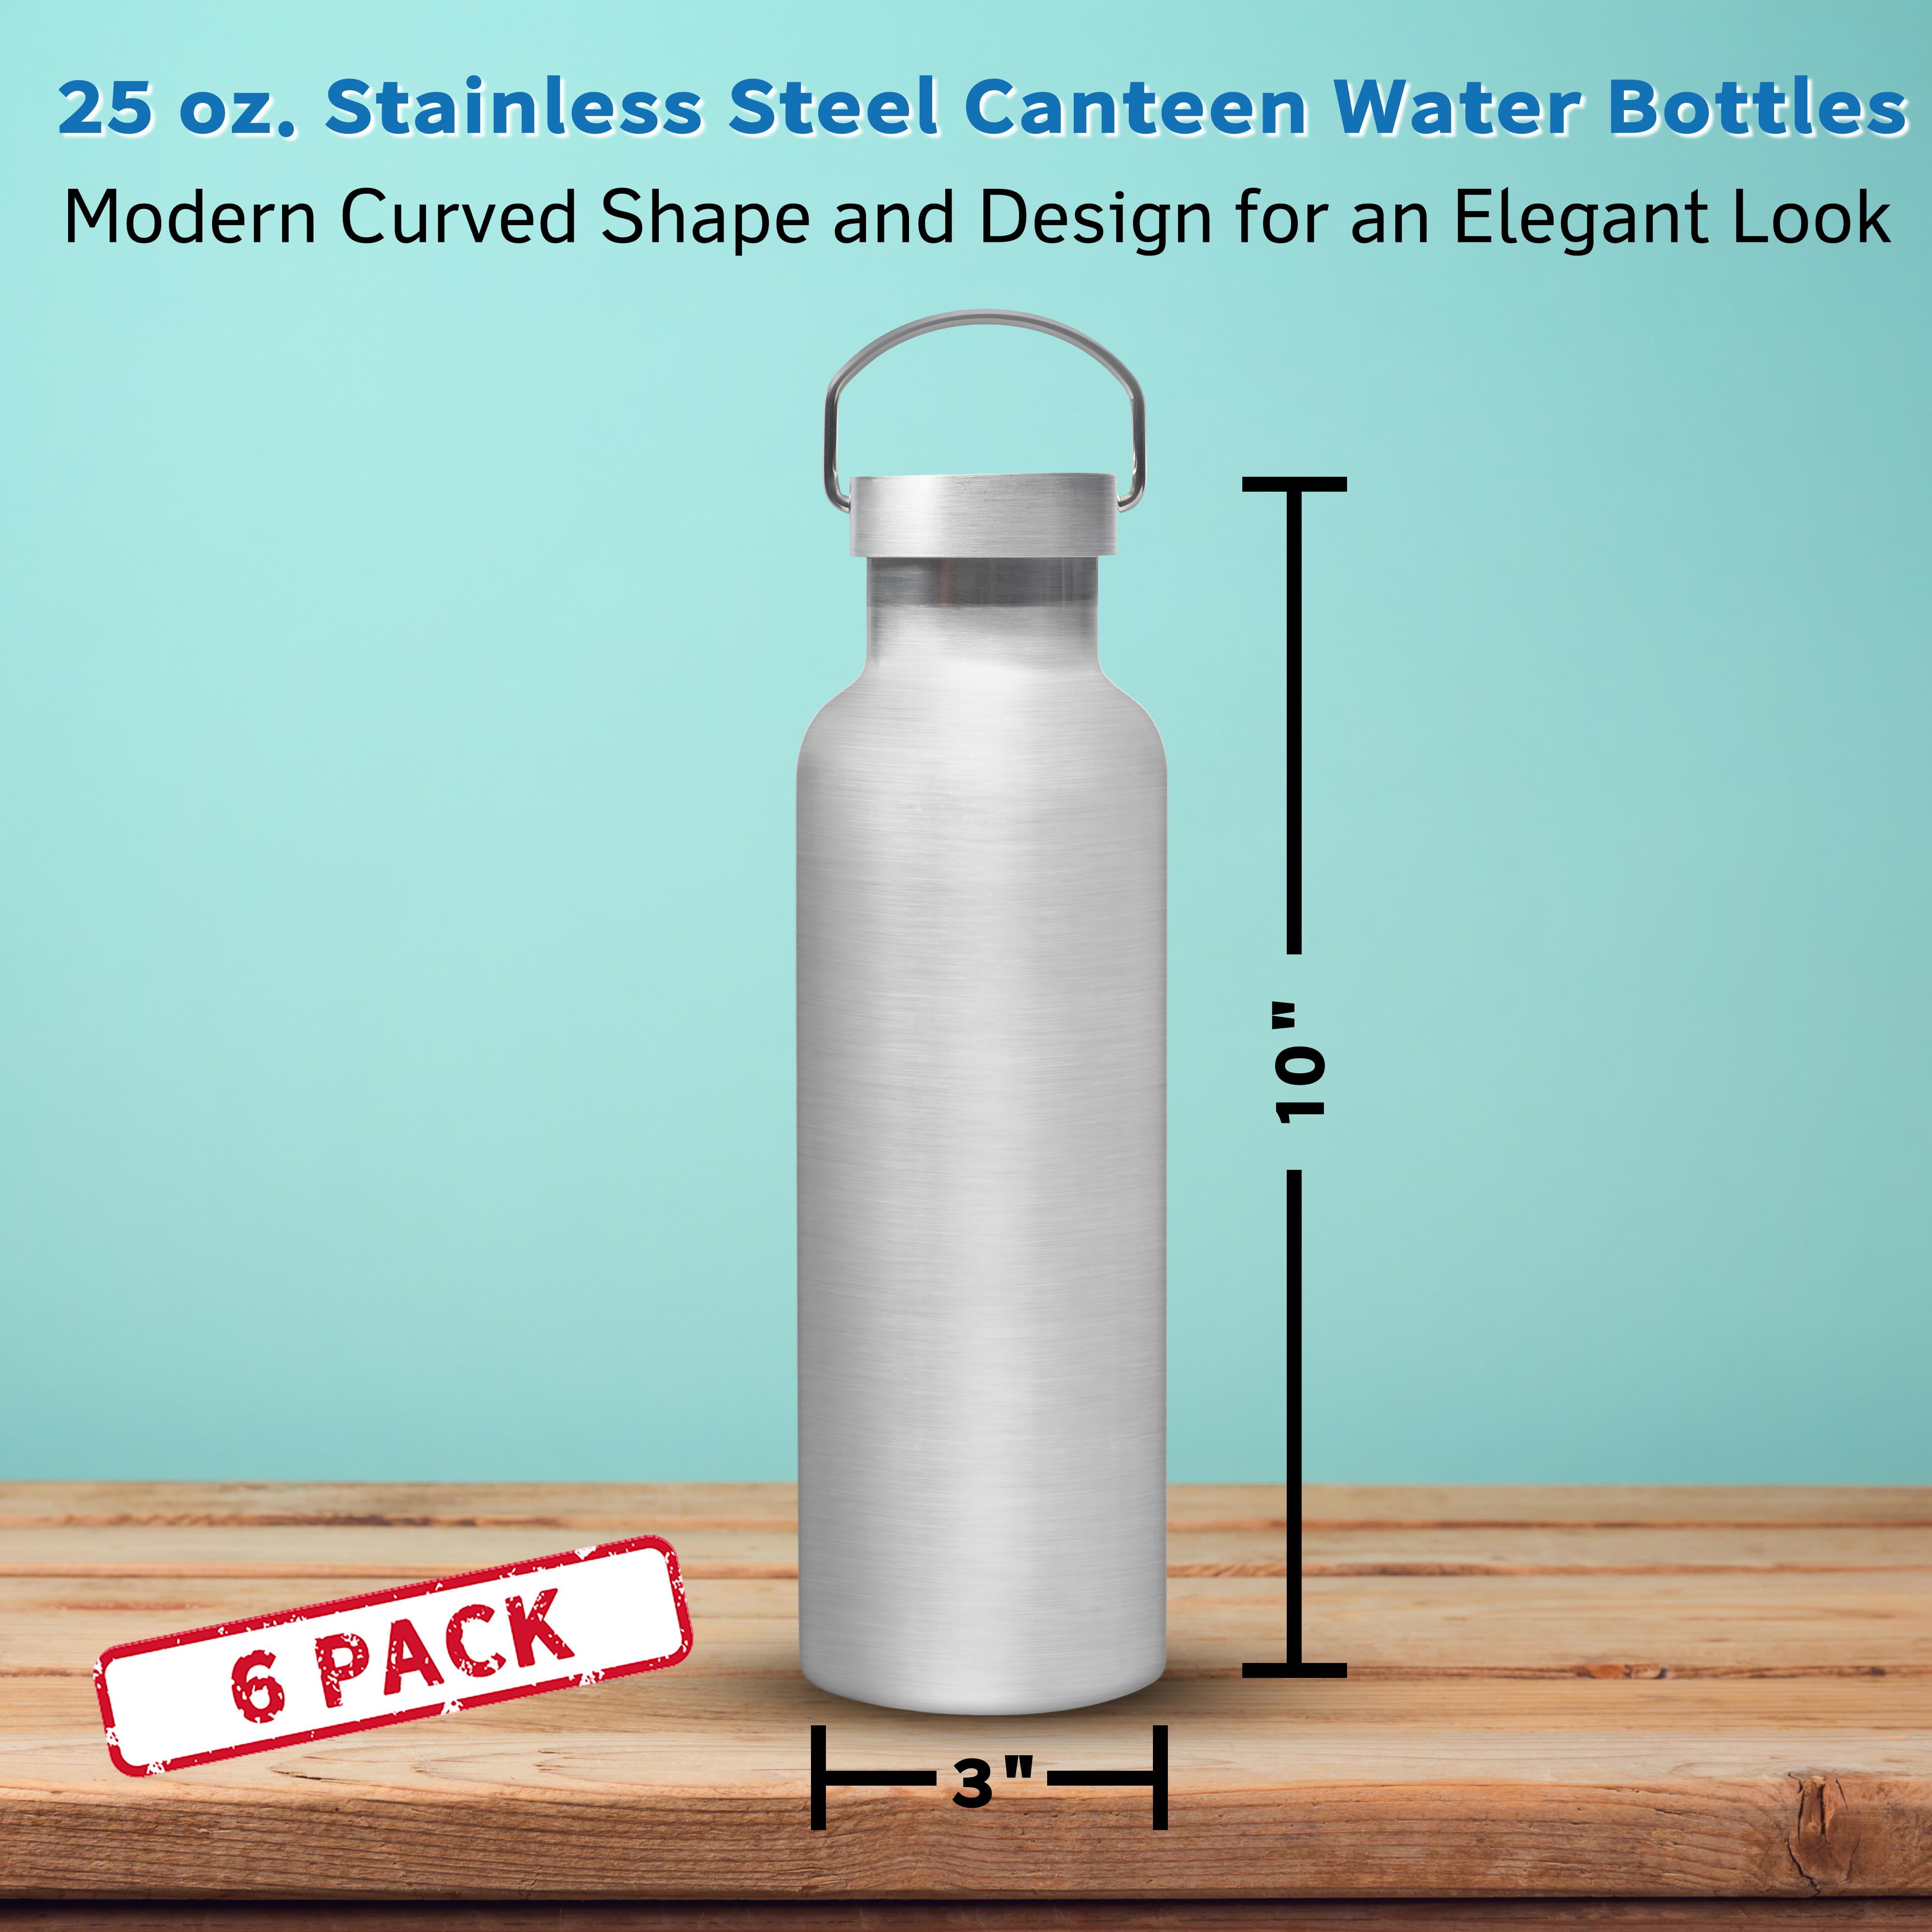 Claplante Glass Water Bottles, 6 pcs 25 oz Glass Bottles, Reusable Sports  Water Bottle with Stainles…See more Claplante Glass Water Bottles, 6 pcs 25